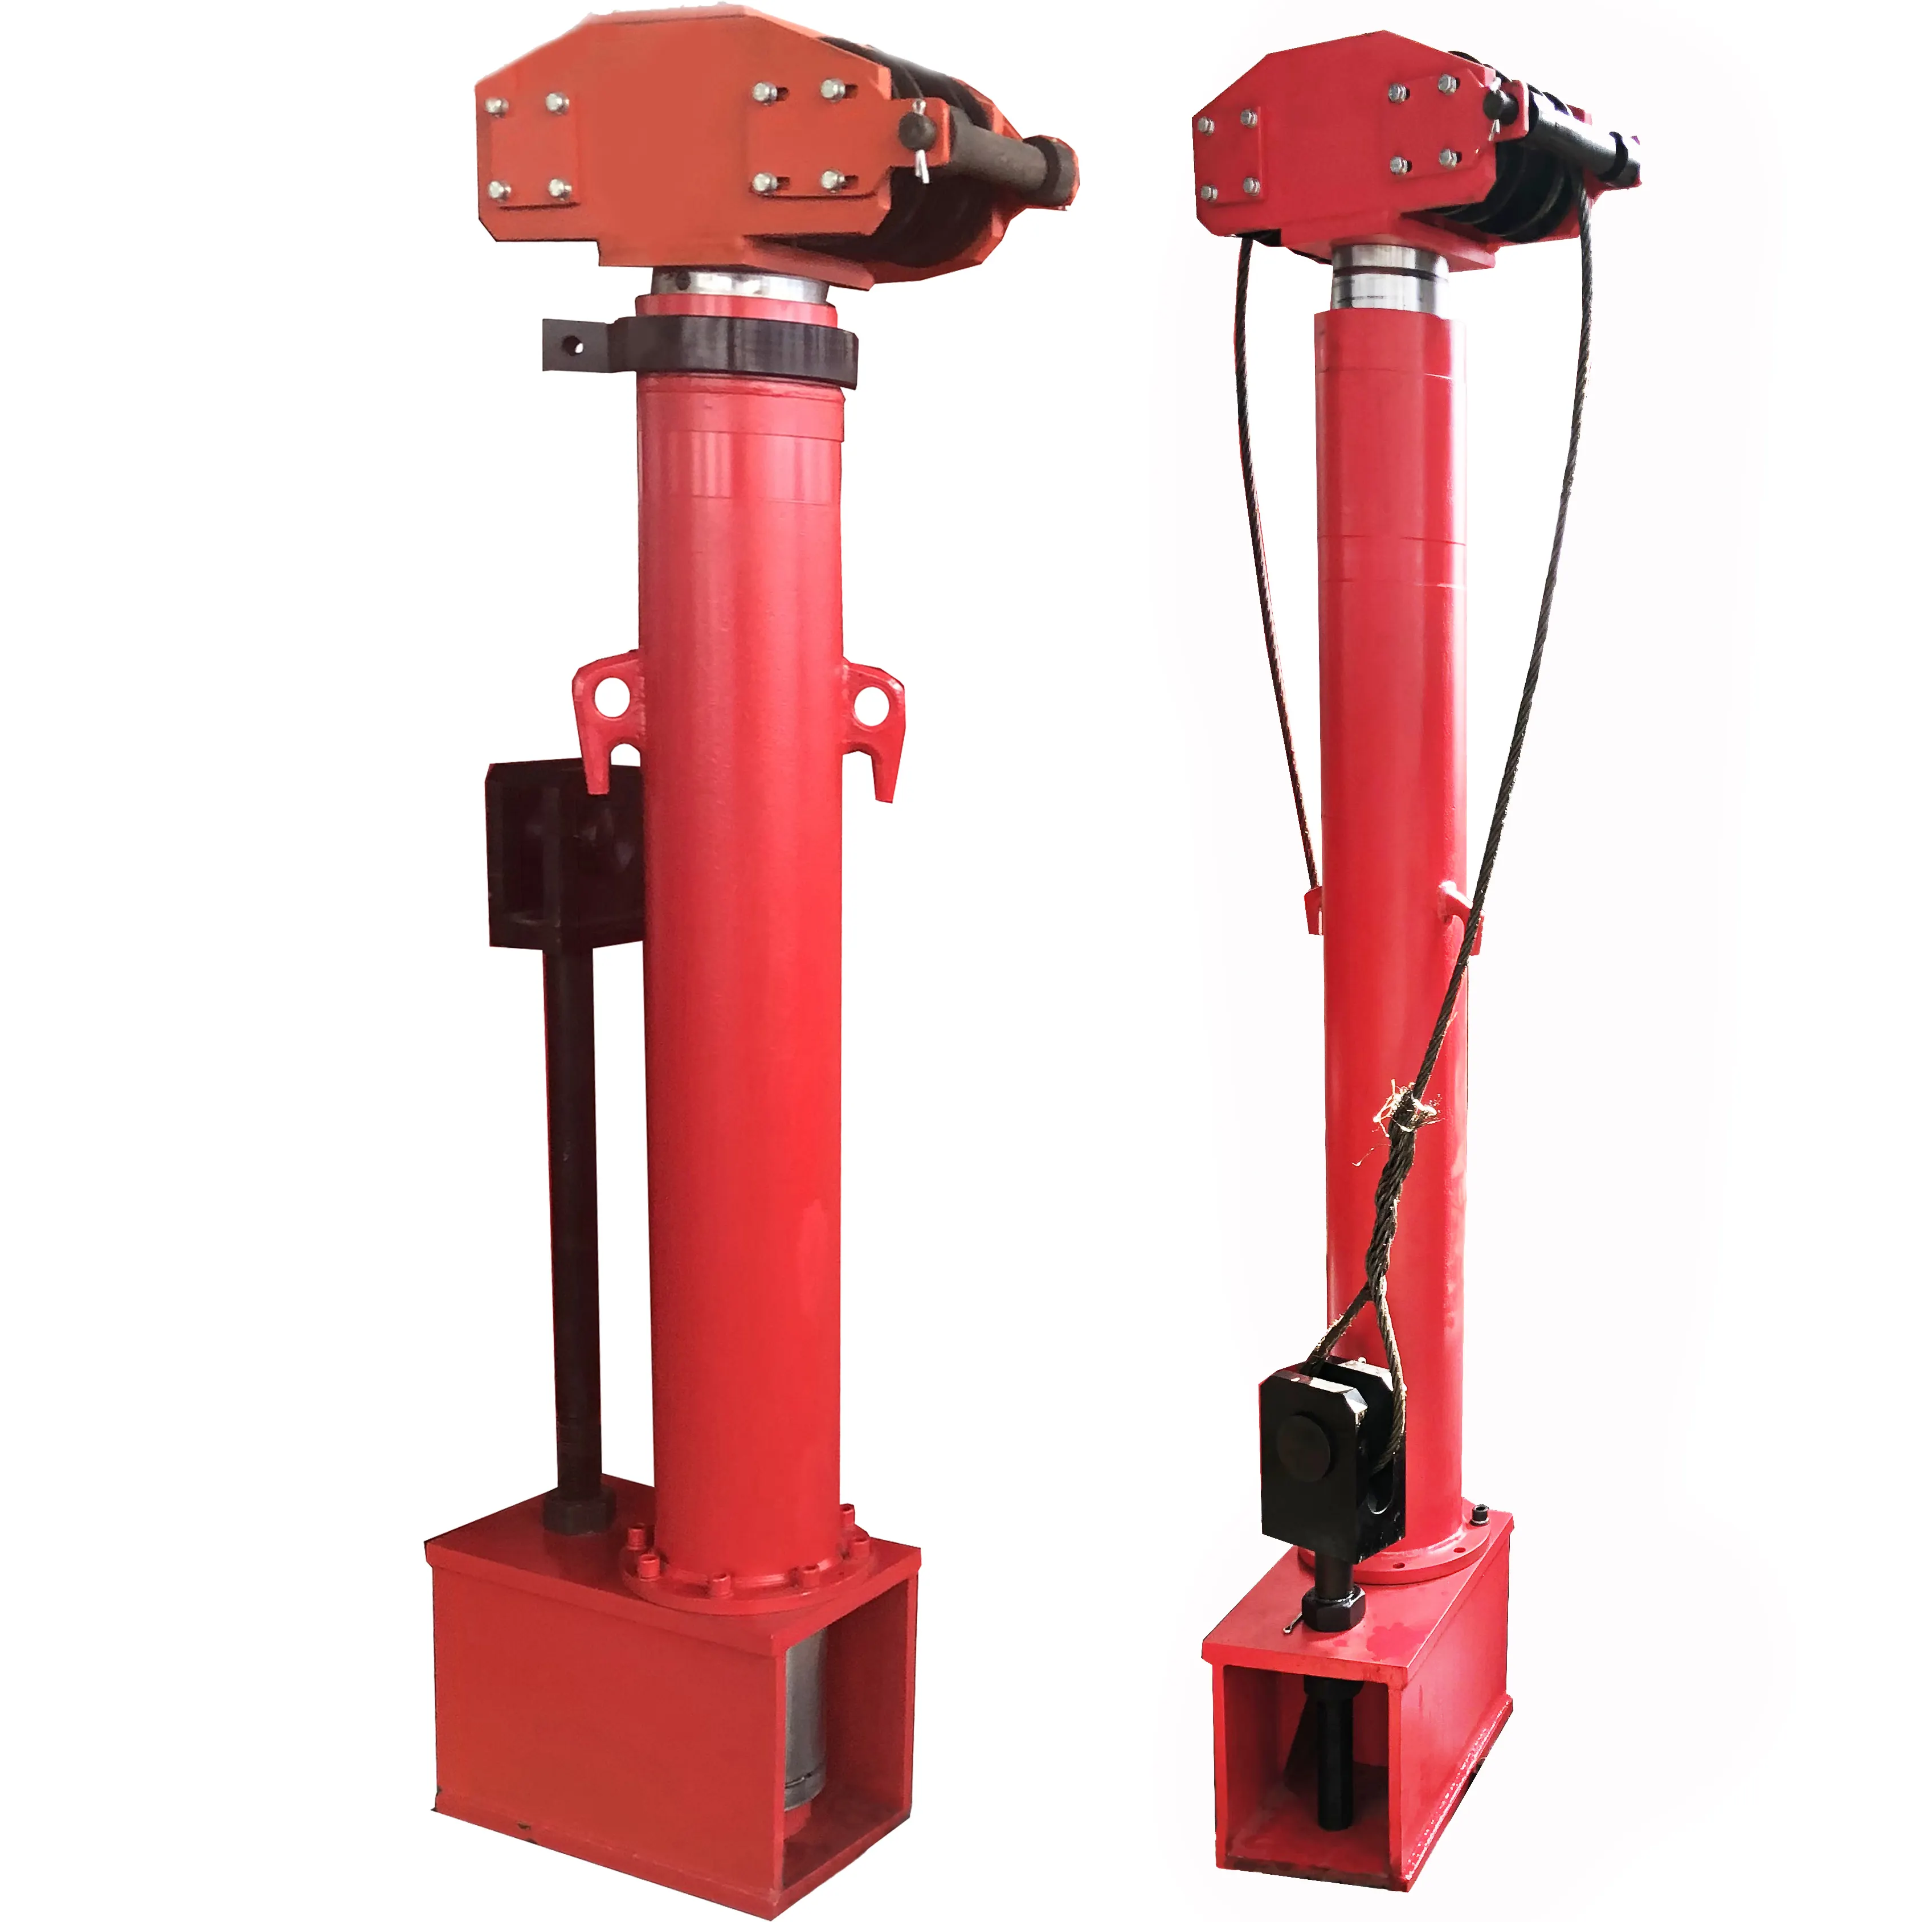 Advanced Two Stage Hydraulic Jack Machine Jack For Lifting Tanks